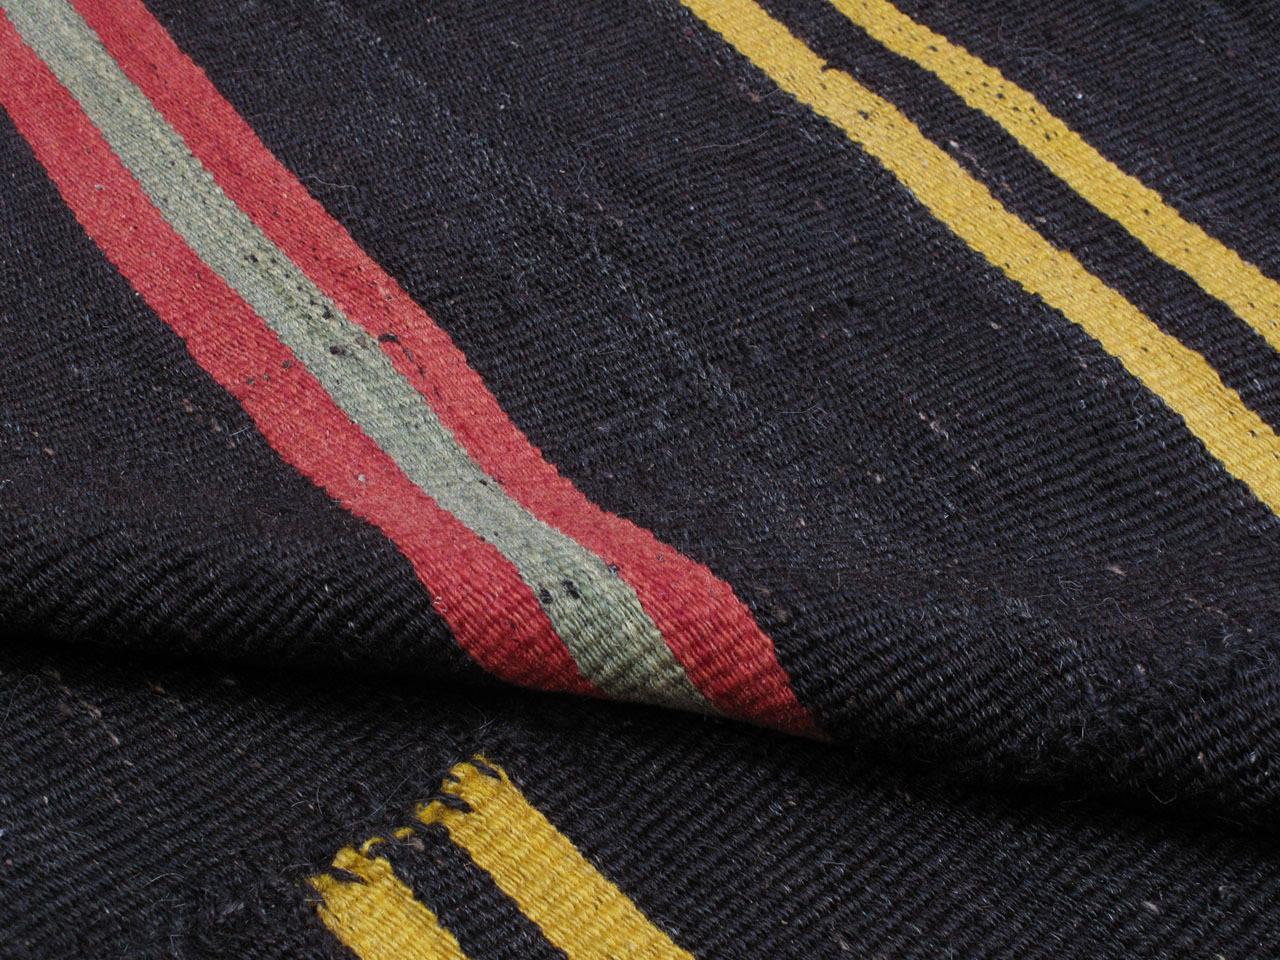 Large Kilim Rug with Bright Stripes 2